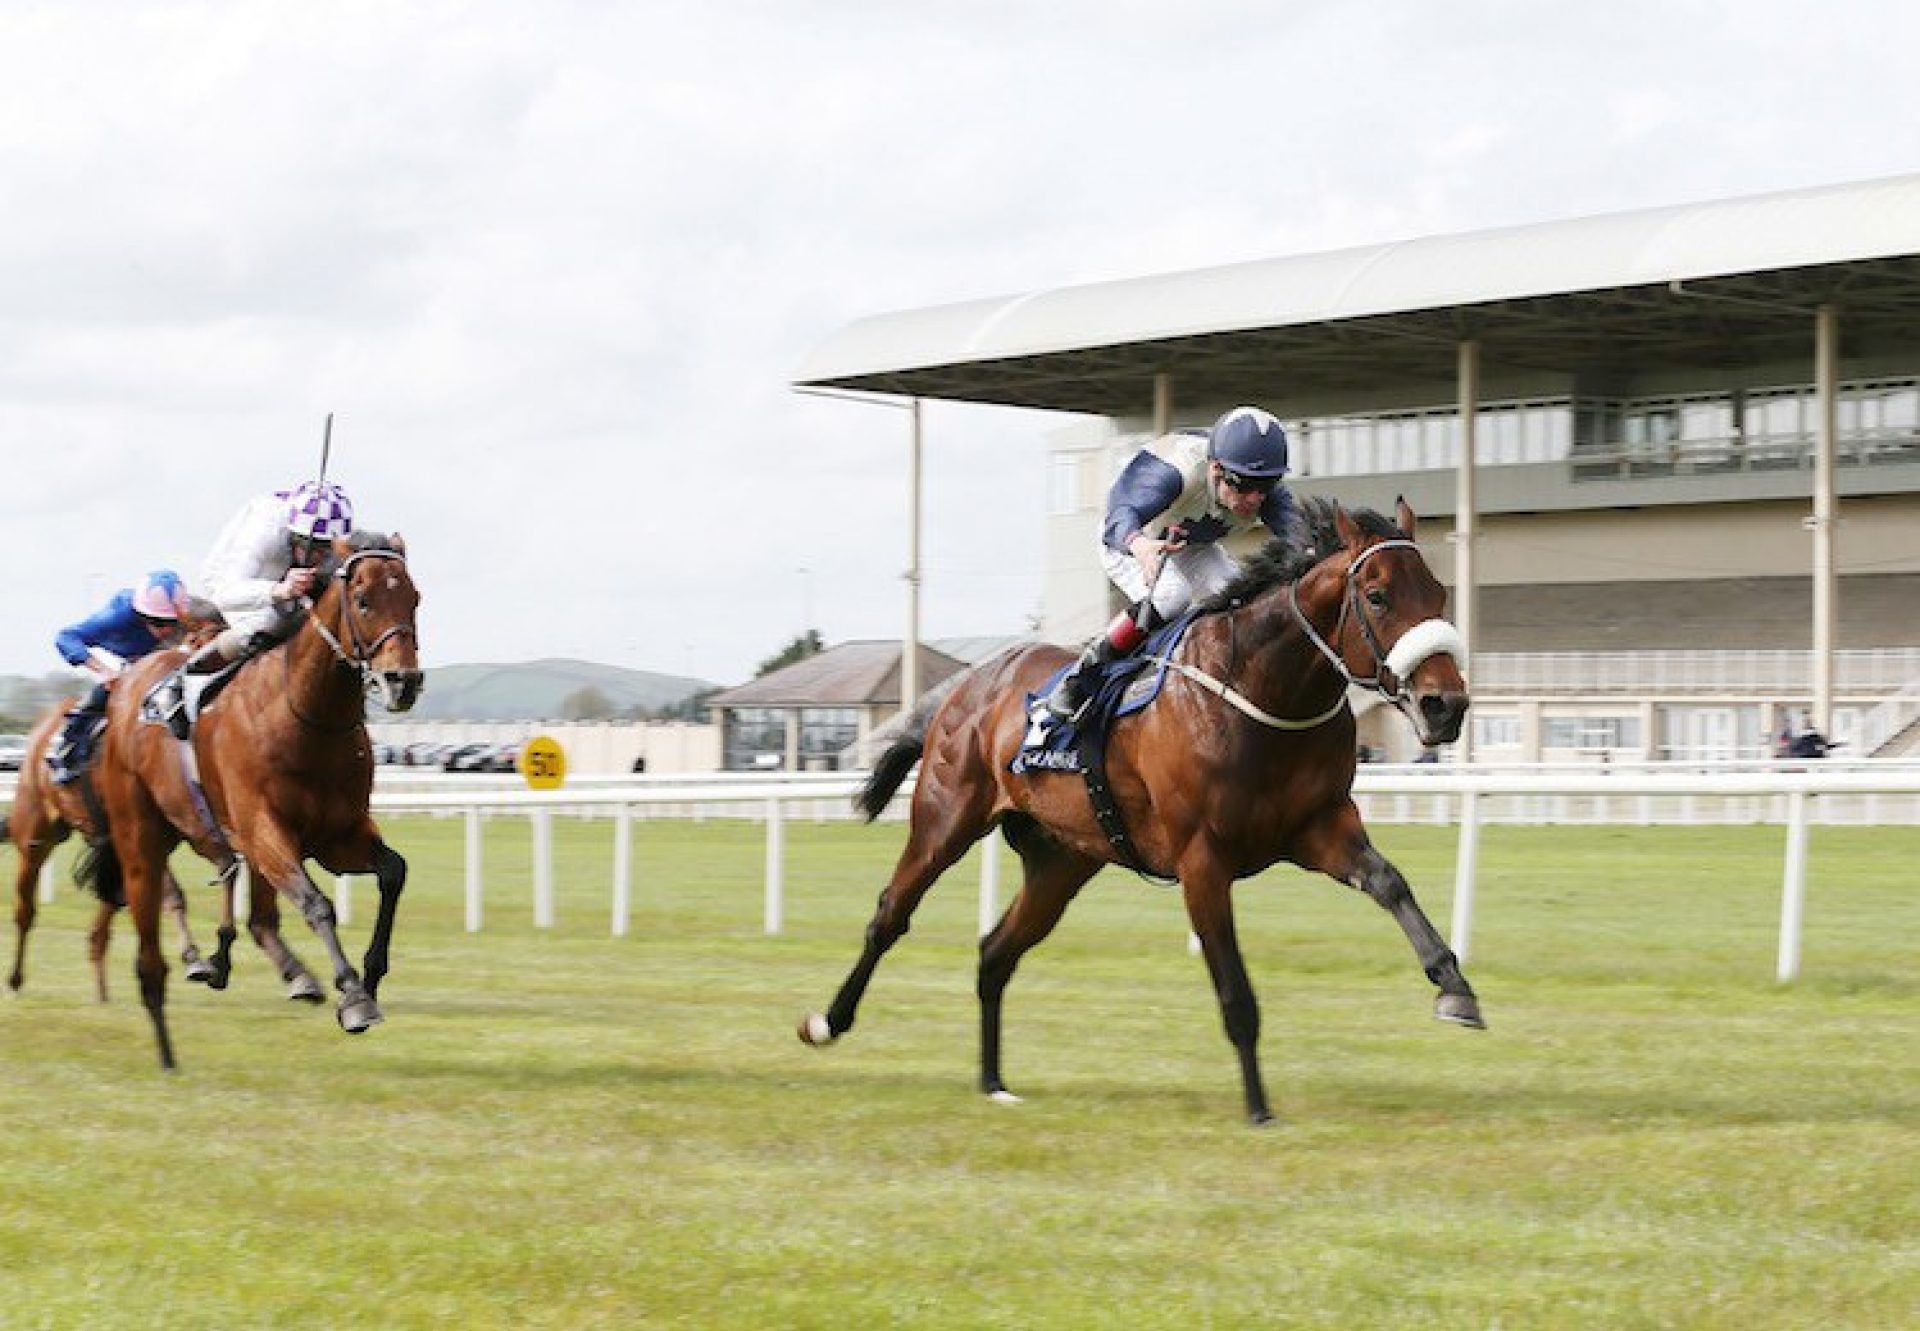 Fascinating Rock (Fastnet Rock) winning the G3 Mooresbridge Stakes at the Curragh